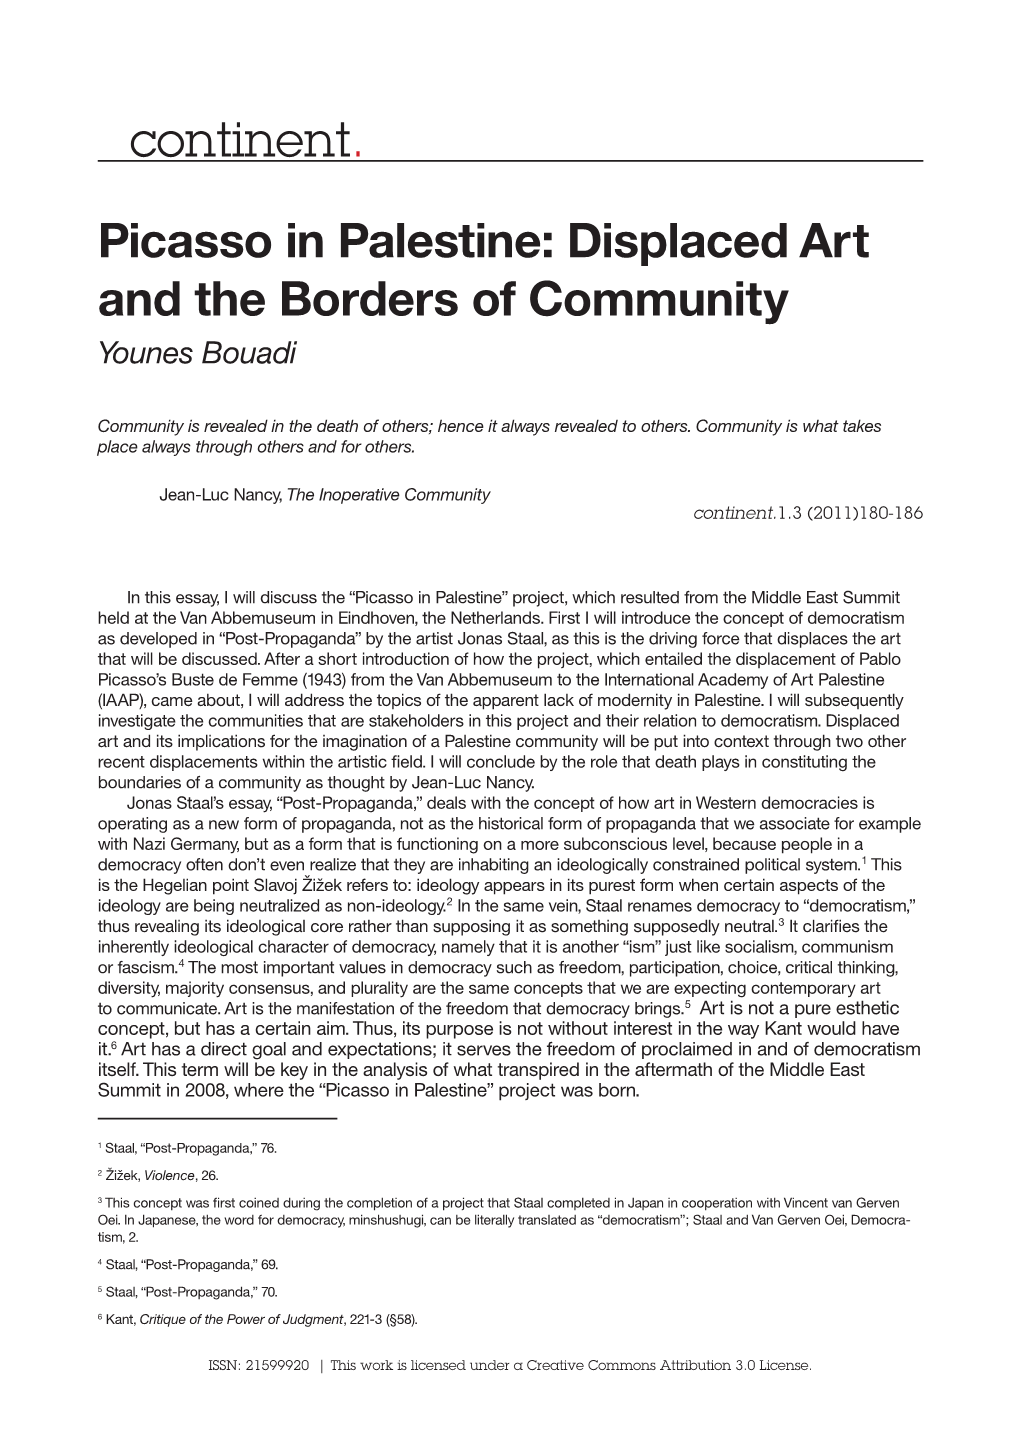 Picasso in Palestine: Displaced Art and the Borders of Community Younes Bouadi